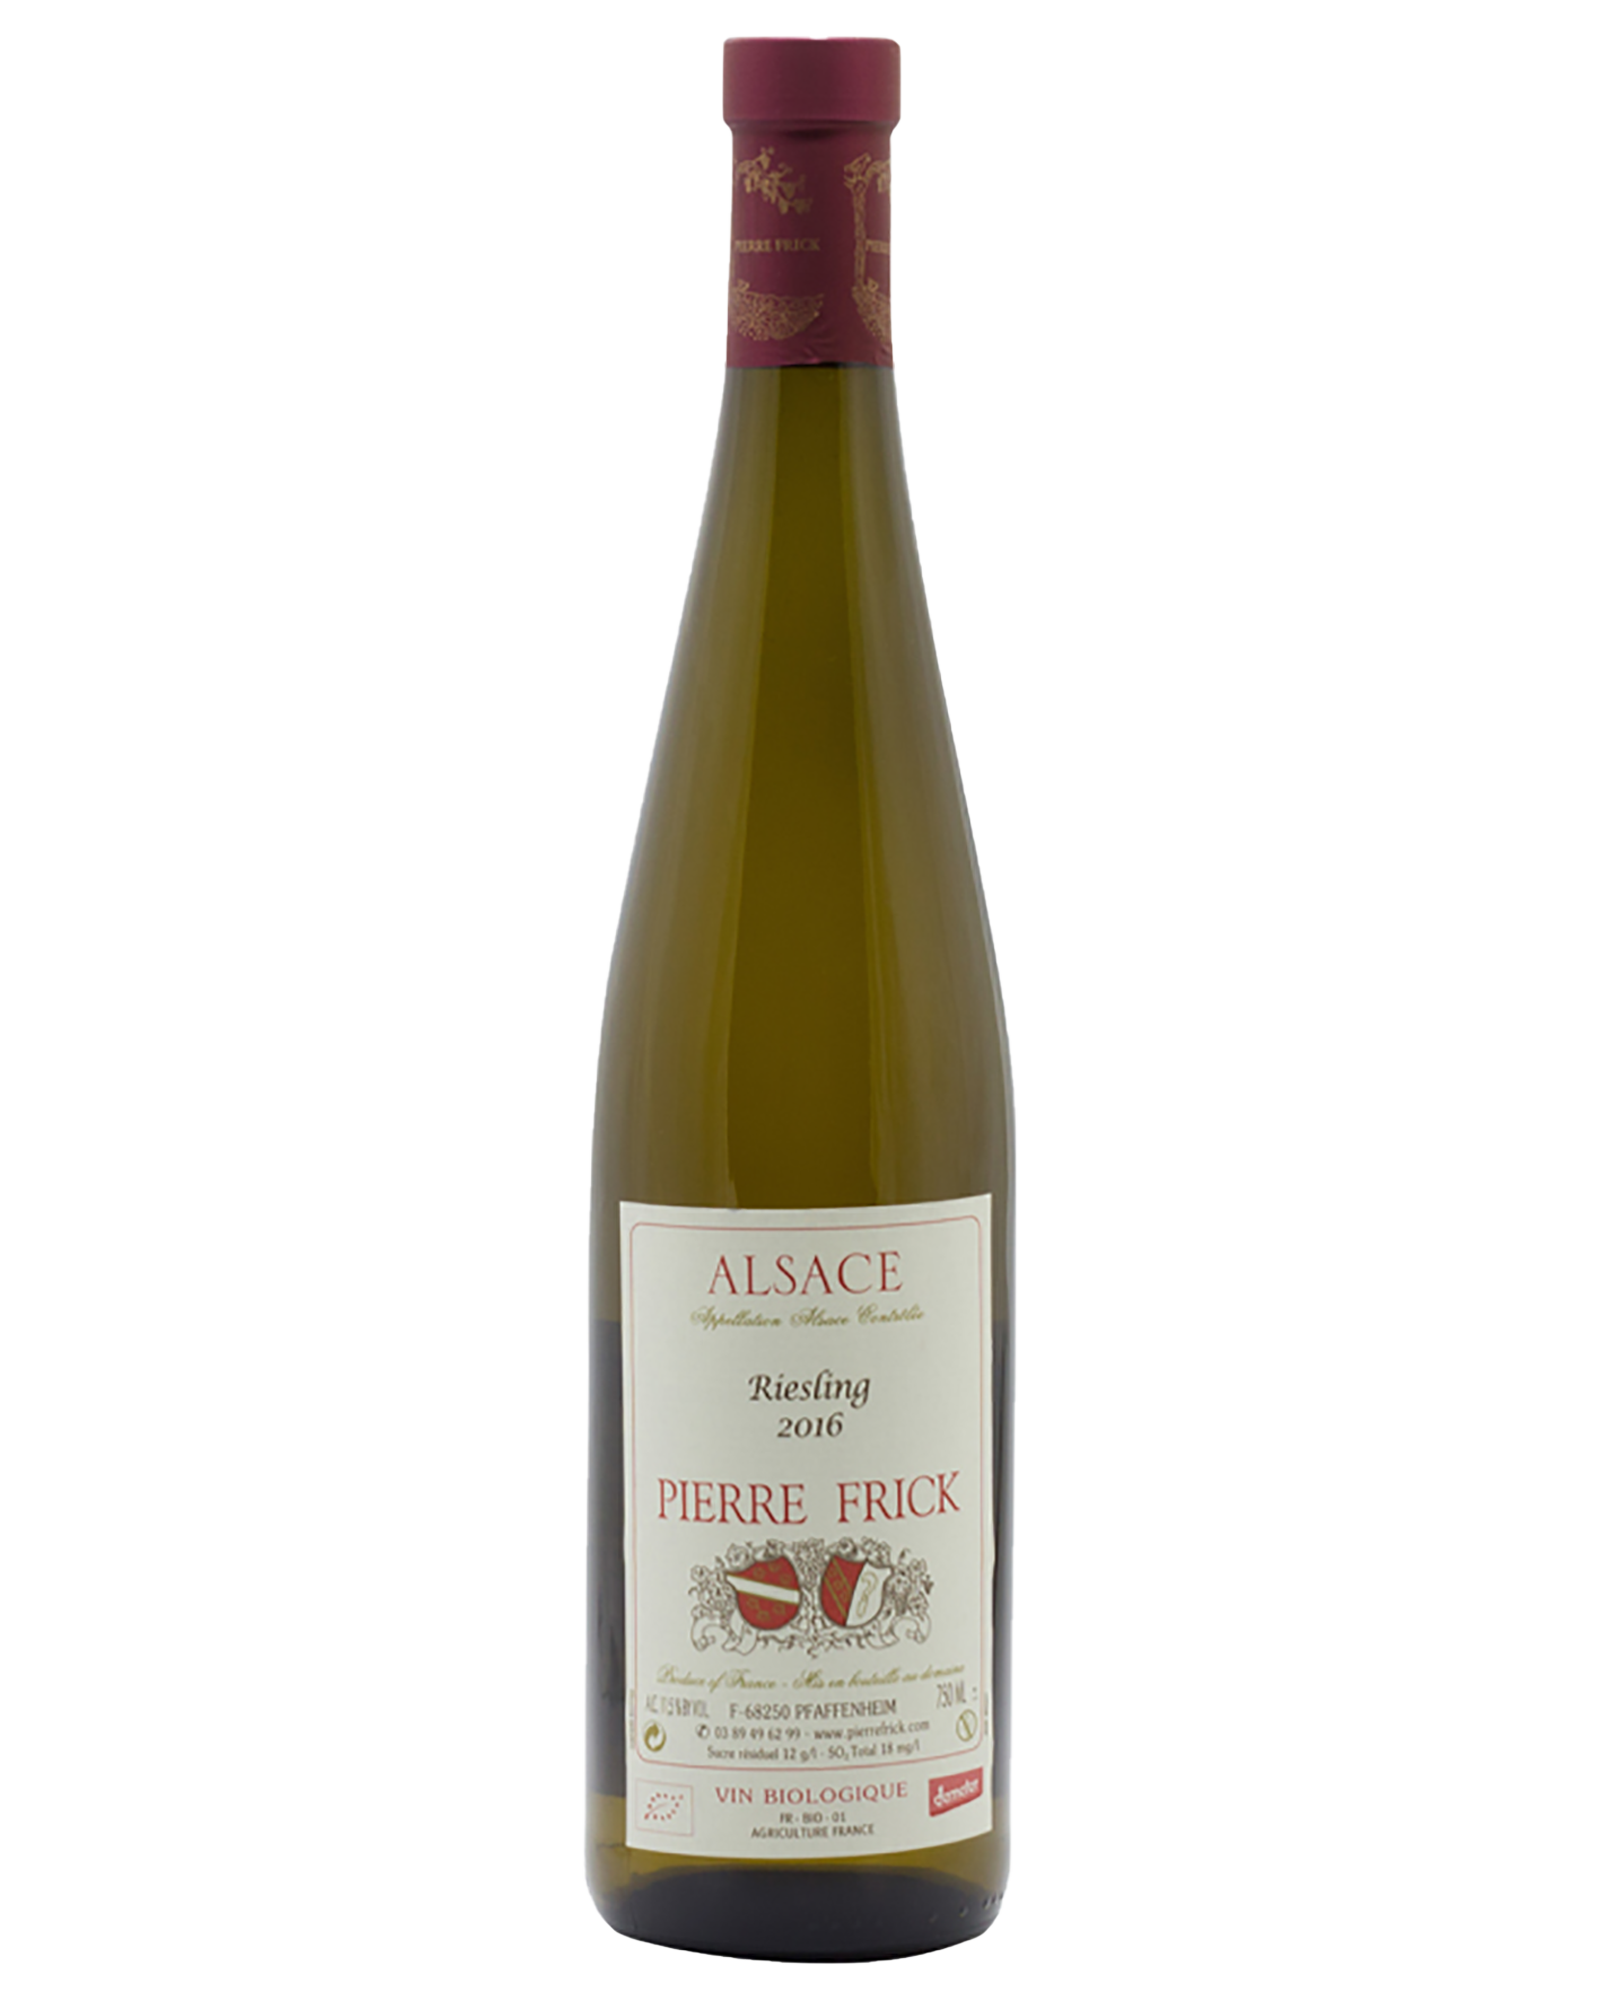 Pierre Frick Riesling 2016